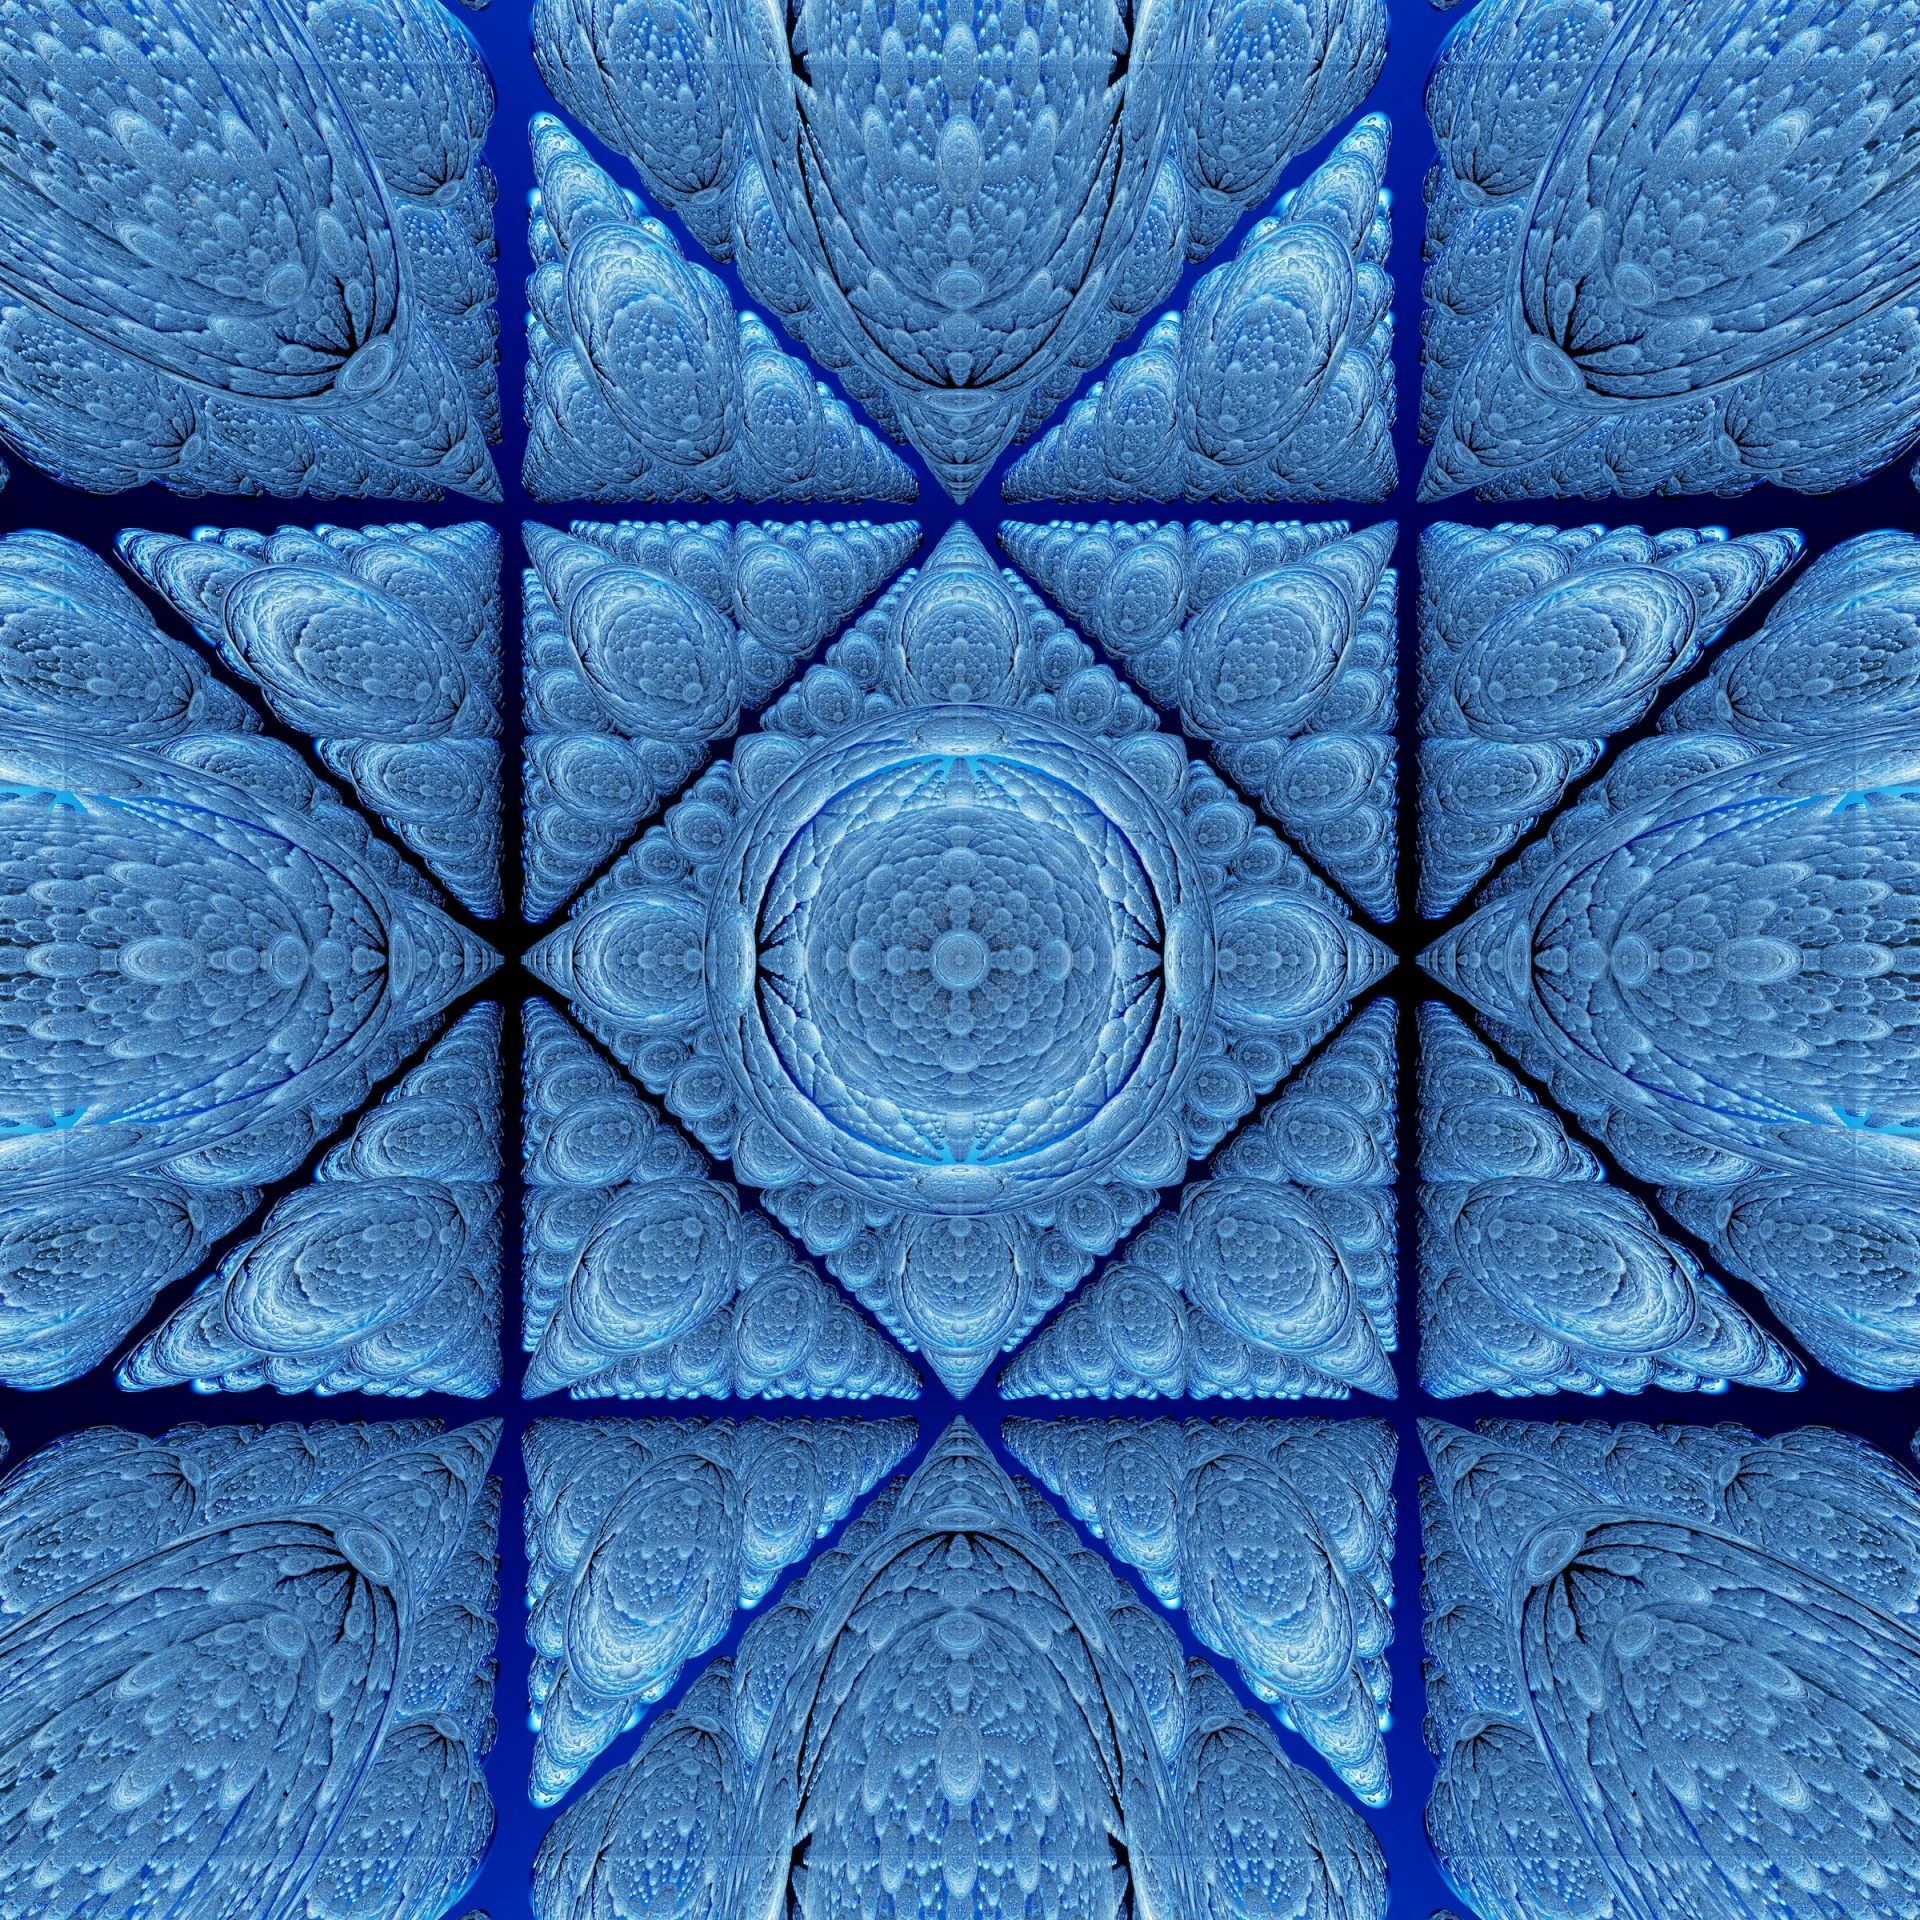 blue and white circles in the center of squares